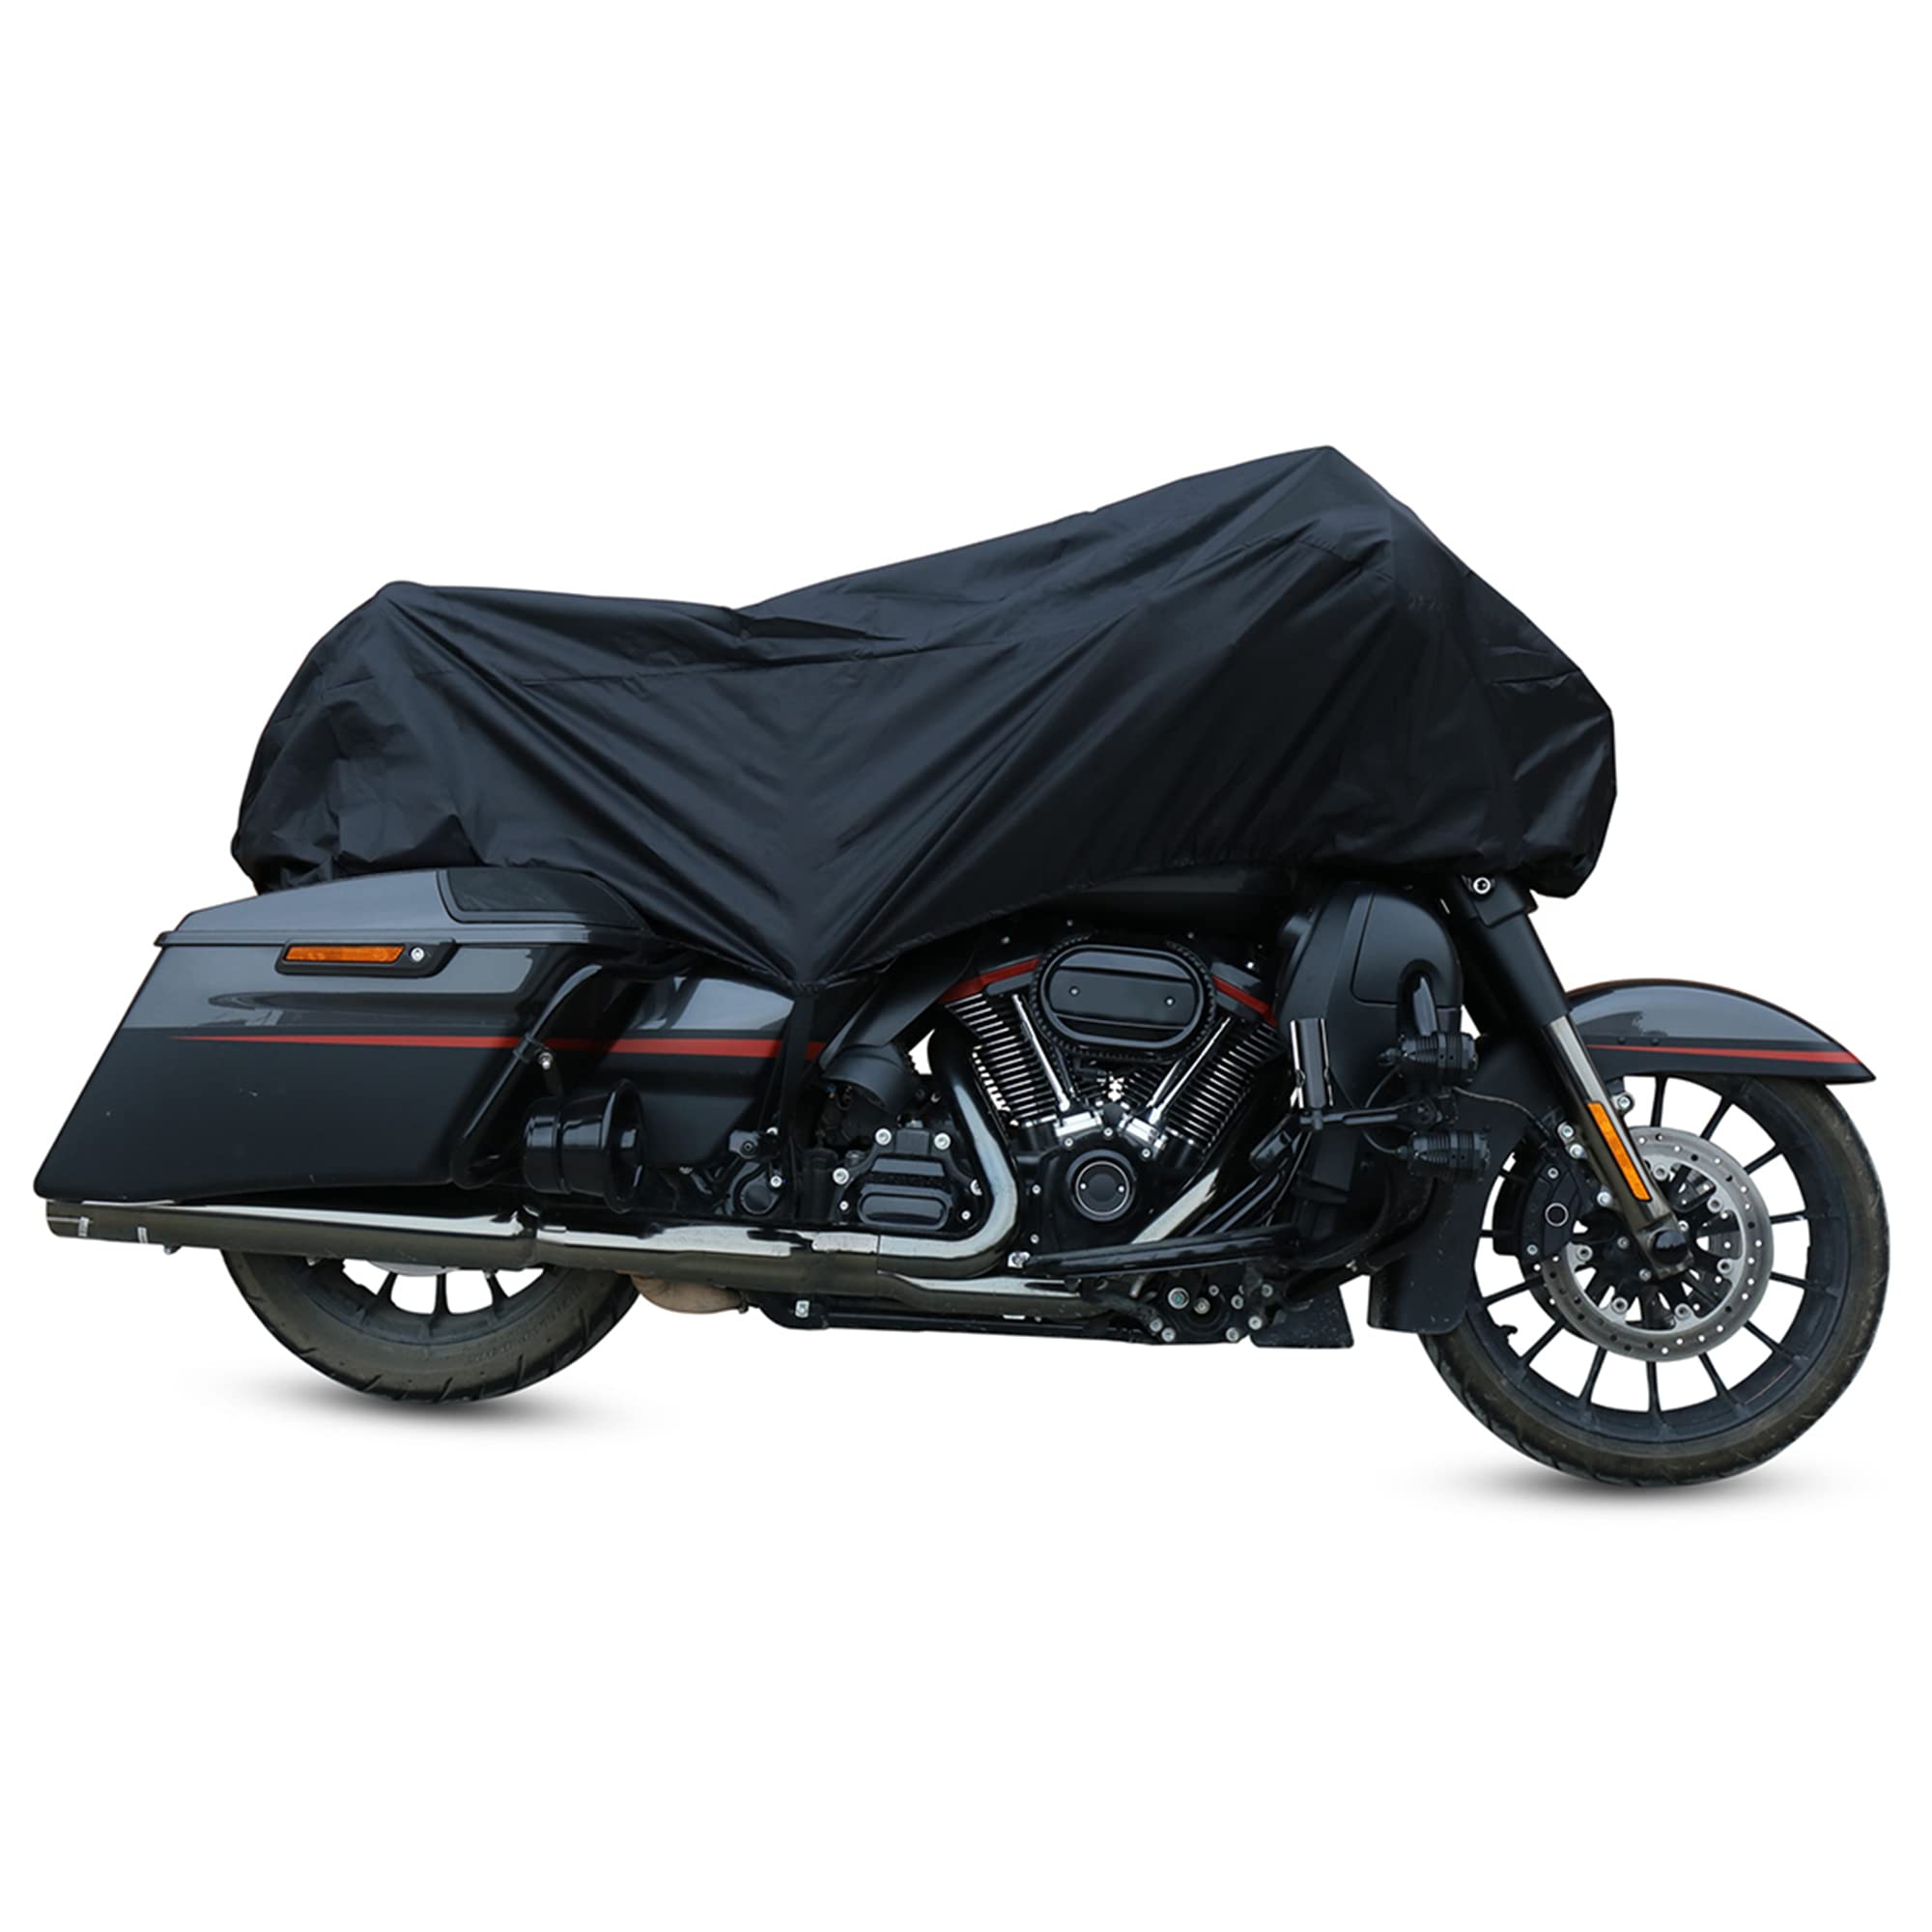 X Autohaux Motorcycle Cover, Lightweight Half Cover, Waterproof, L Size (Amazon) $13.99